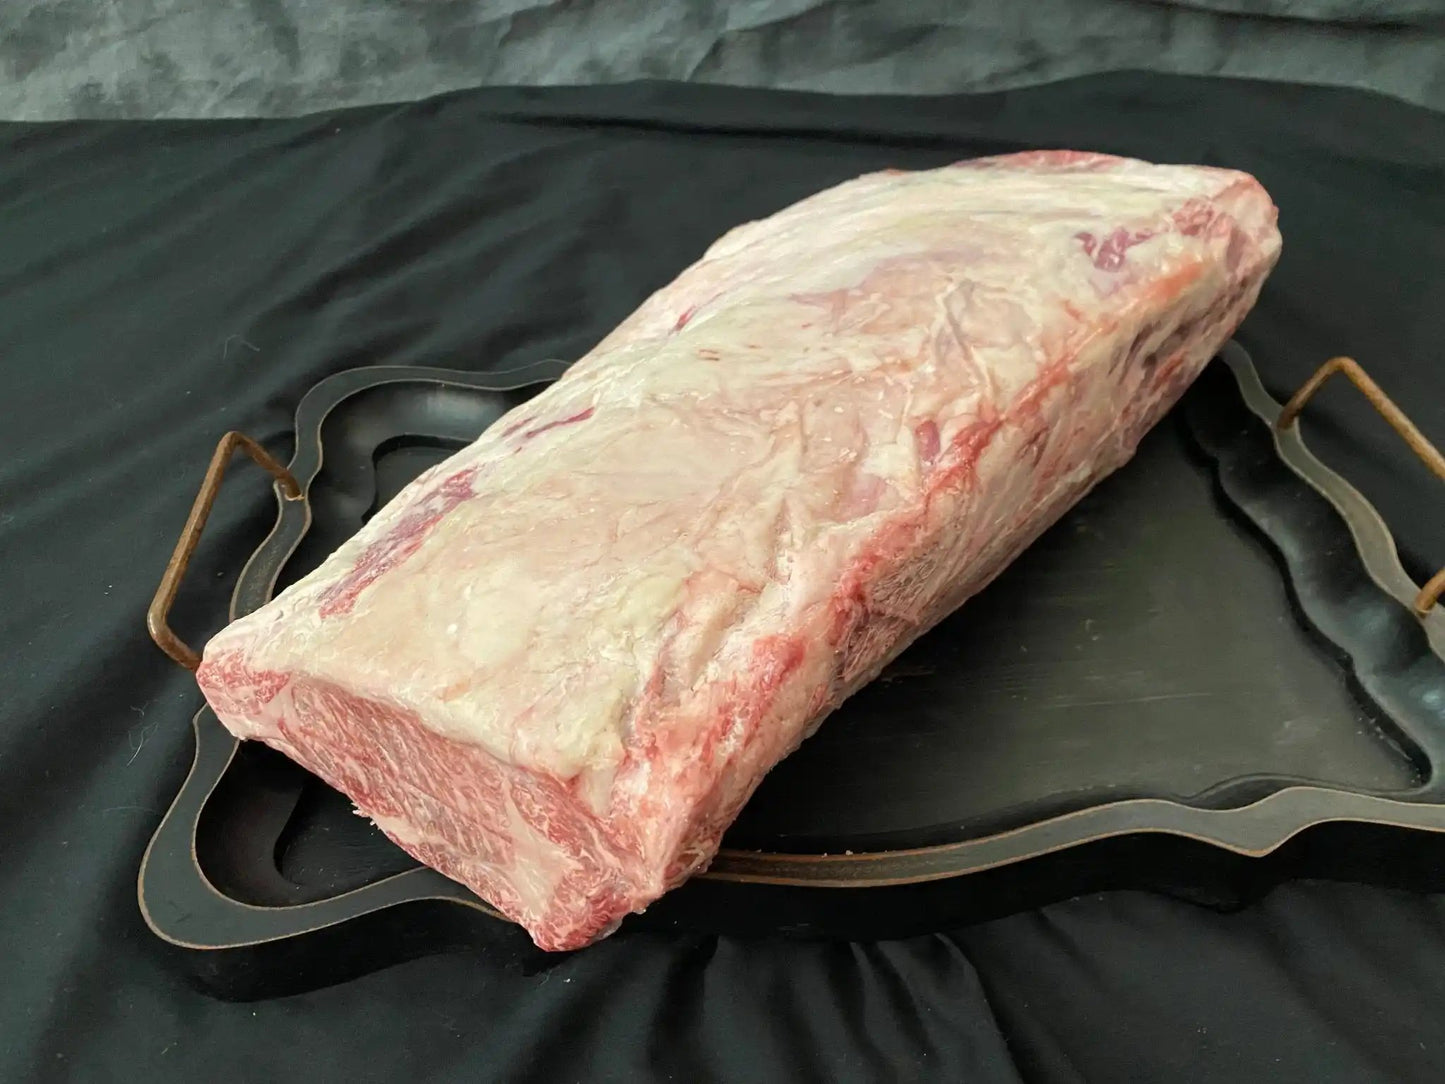 100% All-Natural Grass-Fed Pasture-Raised Wagyu Boneless Prime Rib Roa









Experience the pinnacle of beef excellence with Hufeisen Ranch's 100% All-Natural Fullblood Japanese Wagyu Boneless Prime Rib Roast. Cut from the most priz100%The Hufeisen-Ranch (WYO Wagyu)